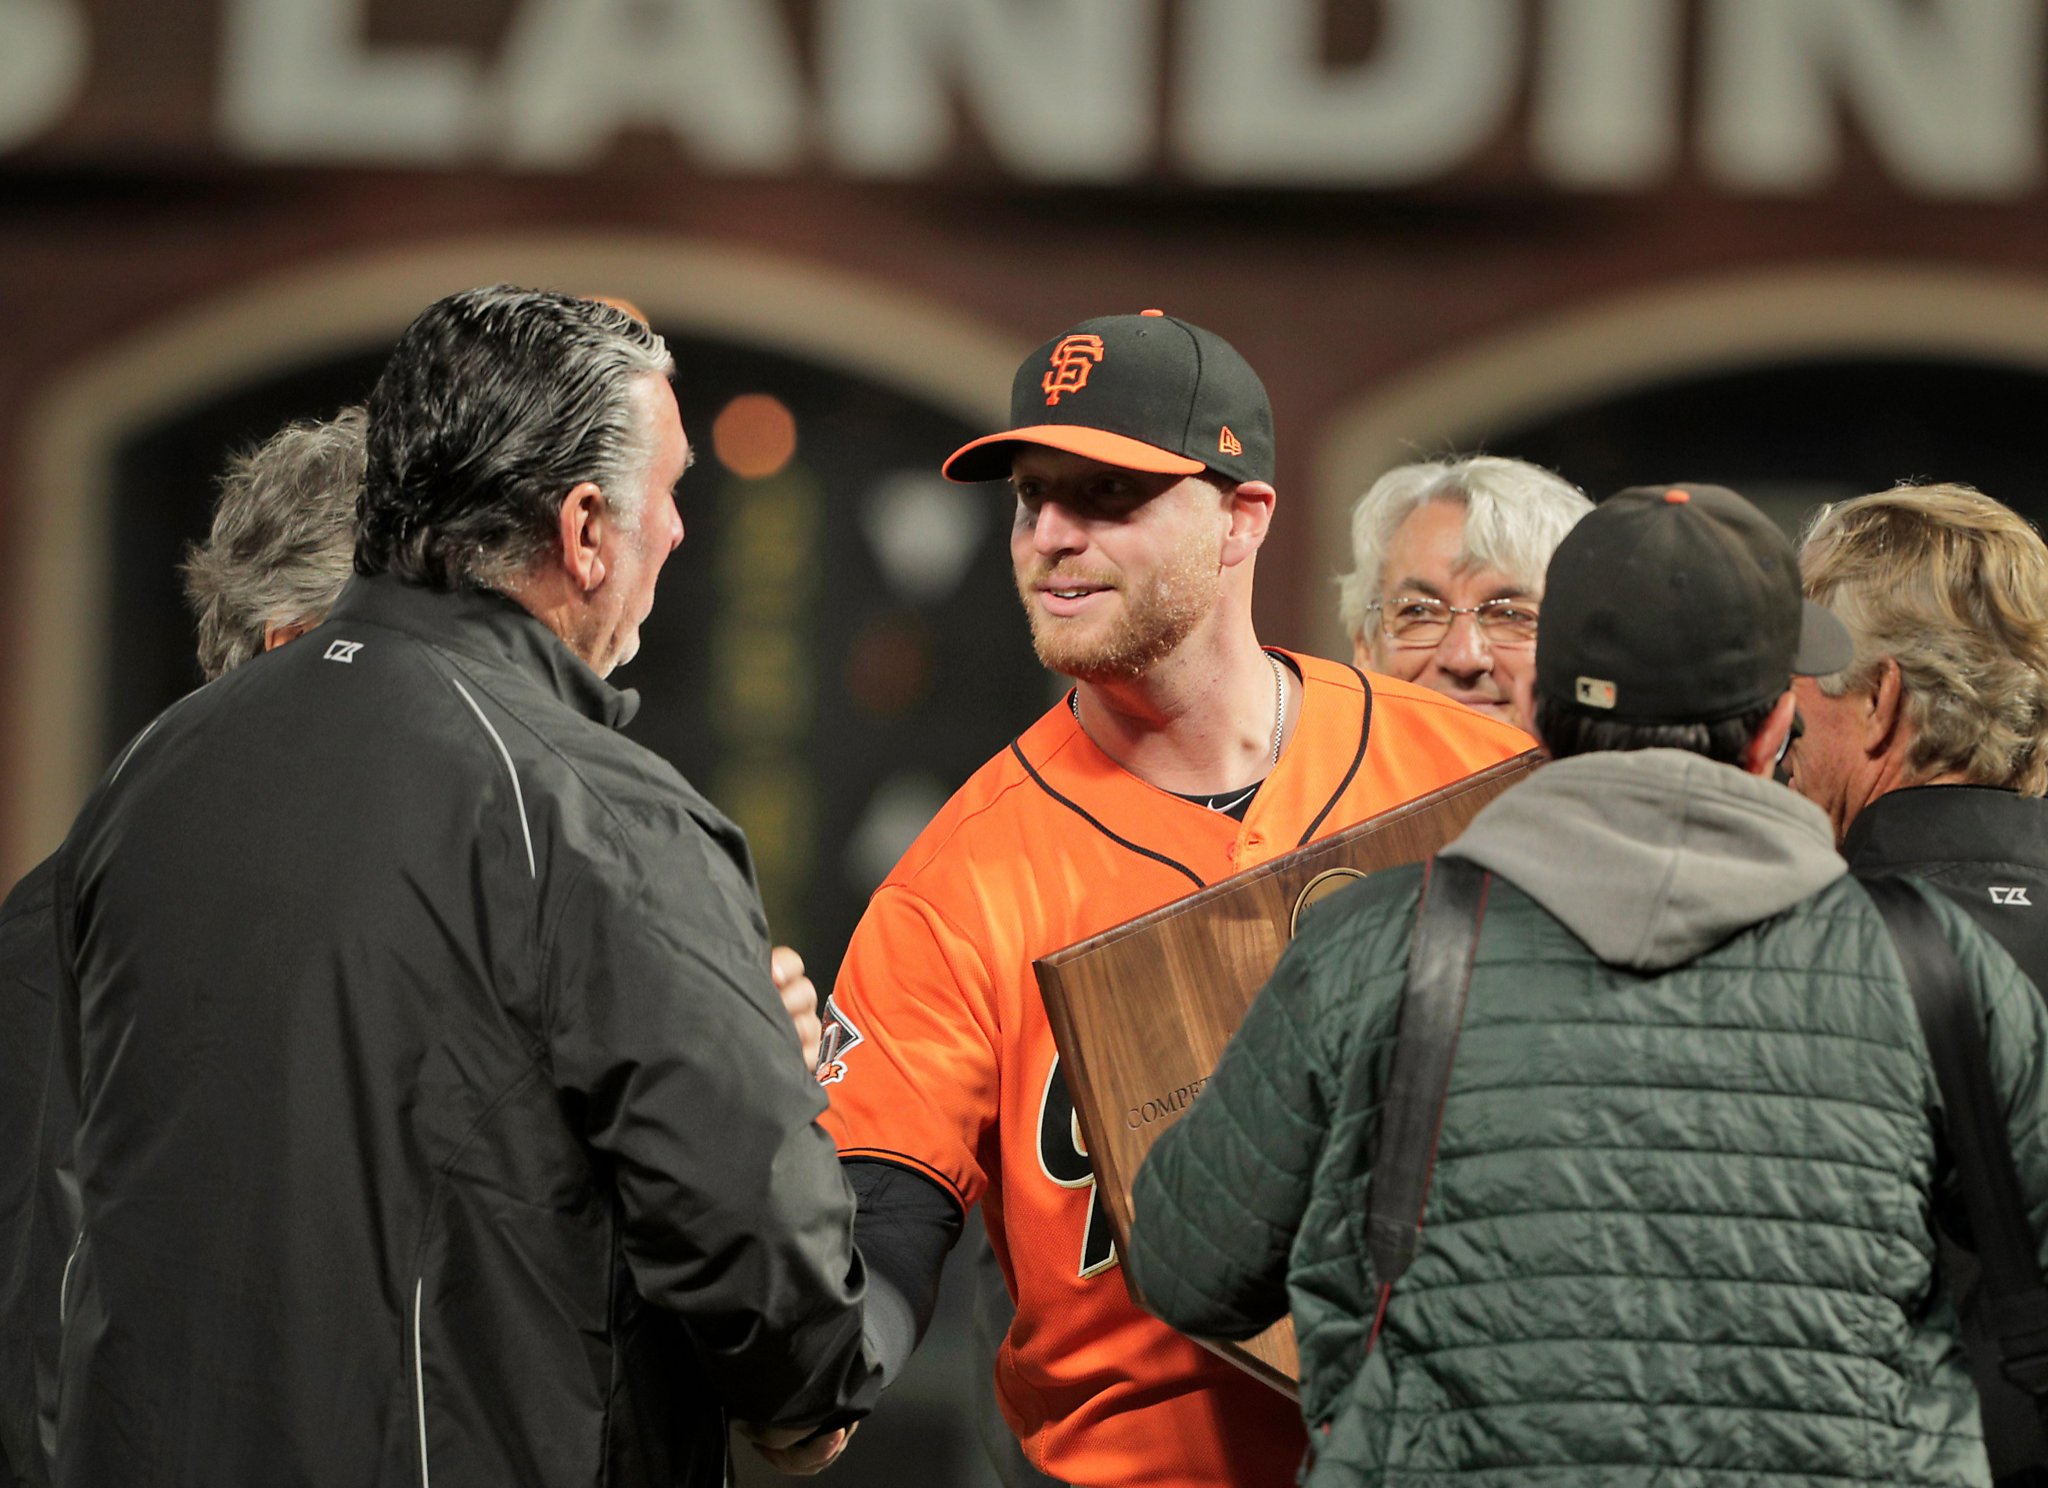 Giants' Willie Mac Award surprise: Reliever Will Smith